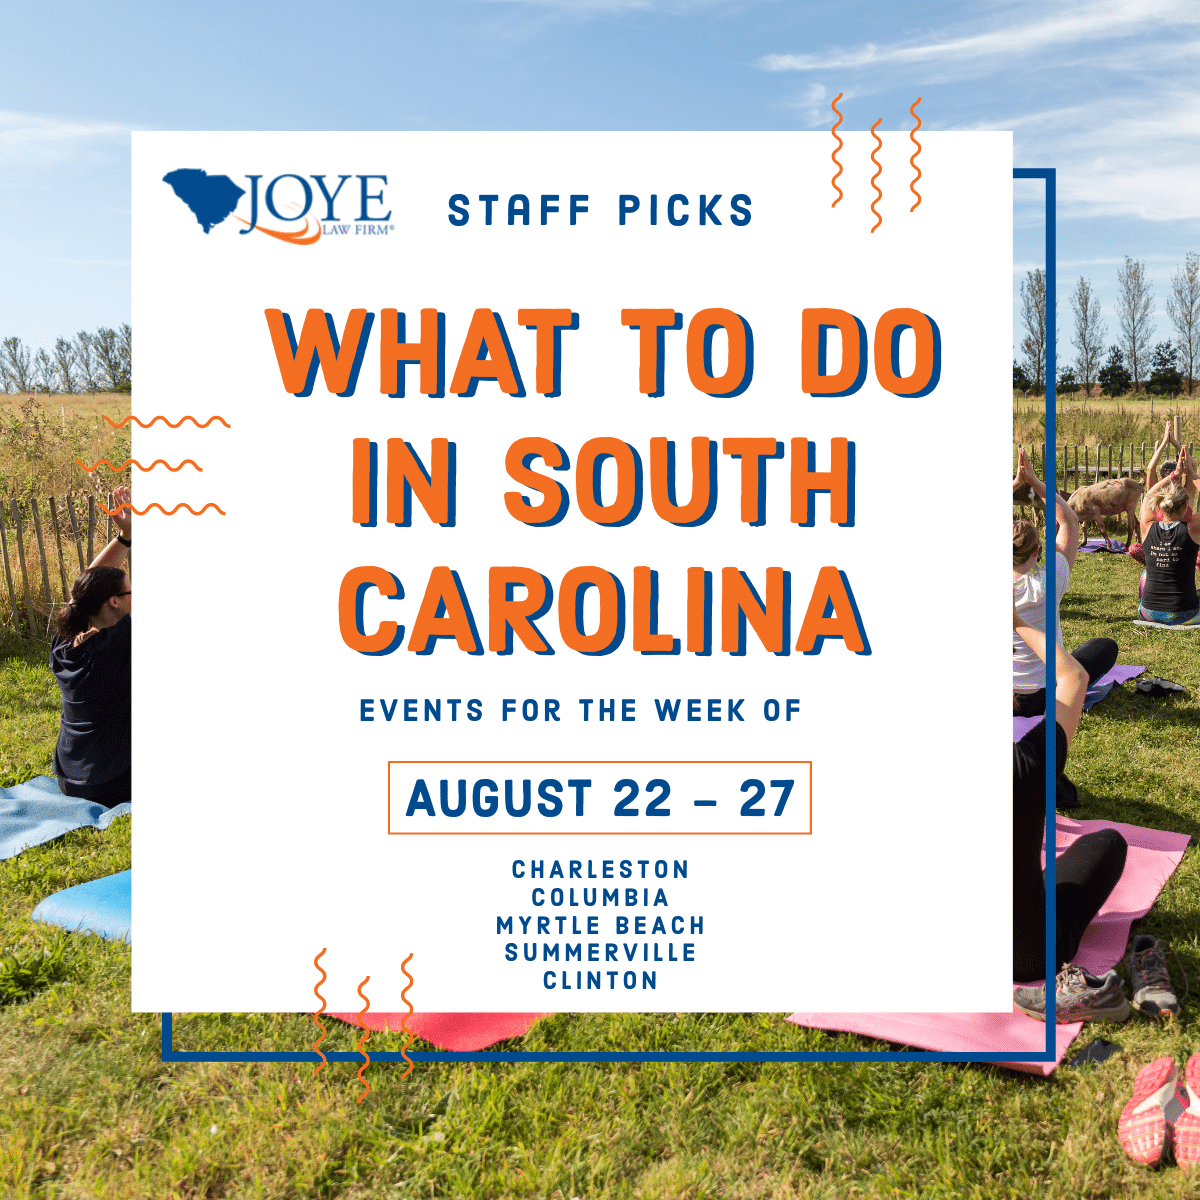 What to do in South Carolina events for the week of August 22-27 for Charleston, Columbia, Myrtle Beach, Summerville and upstate